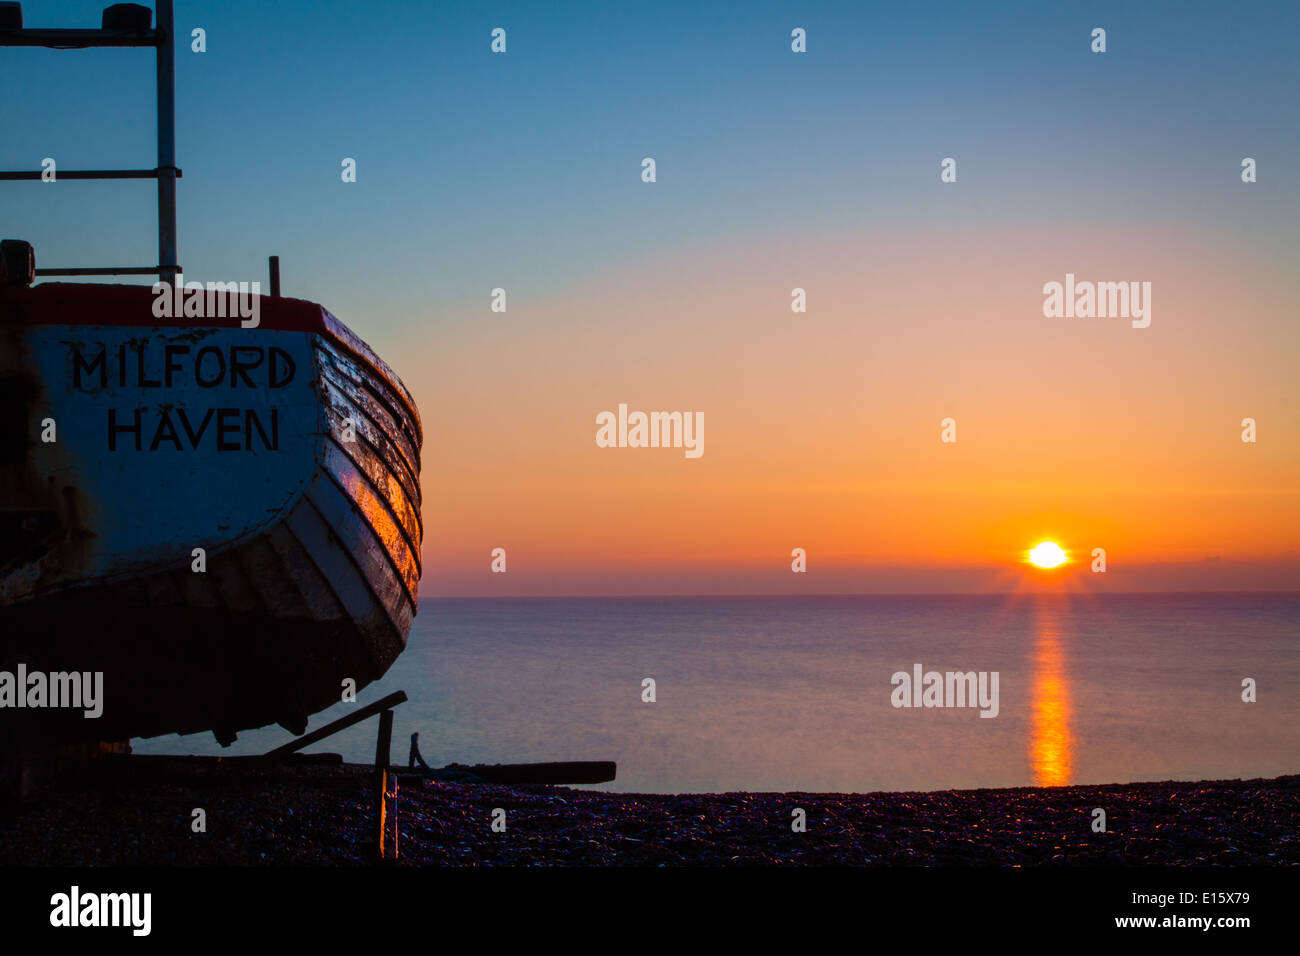 Sunrise with boat on Aldeburgh beach Stock Photo